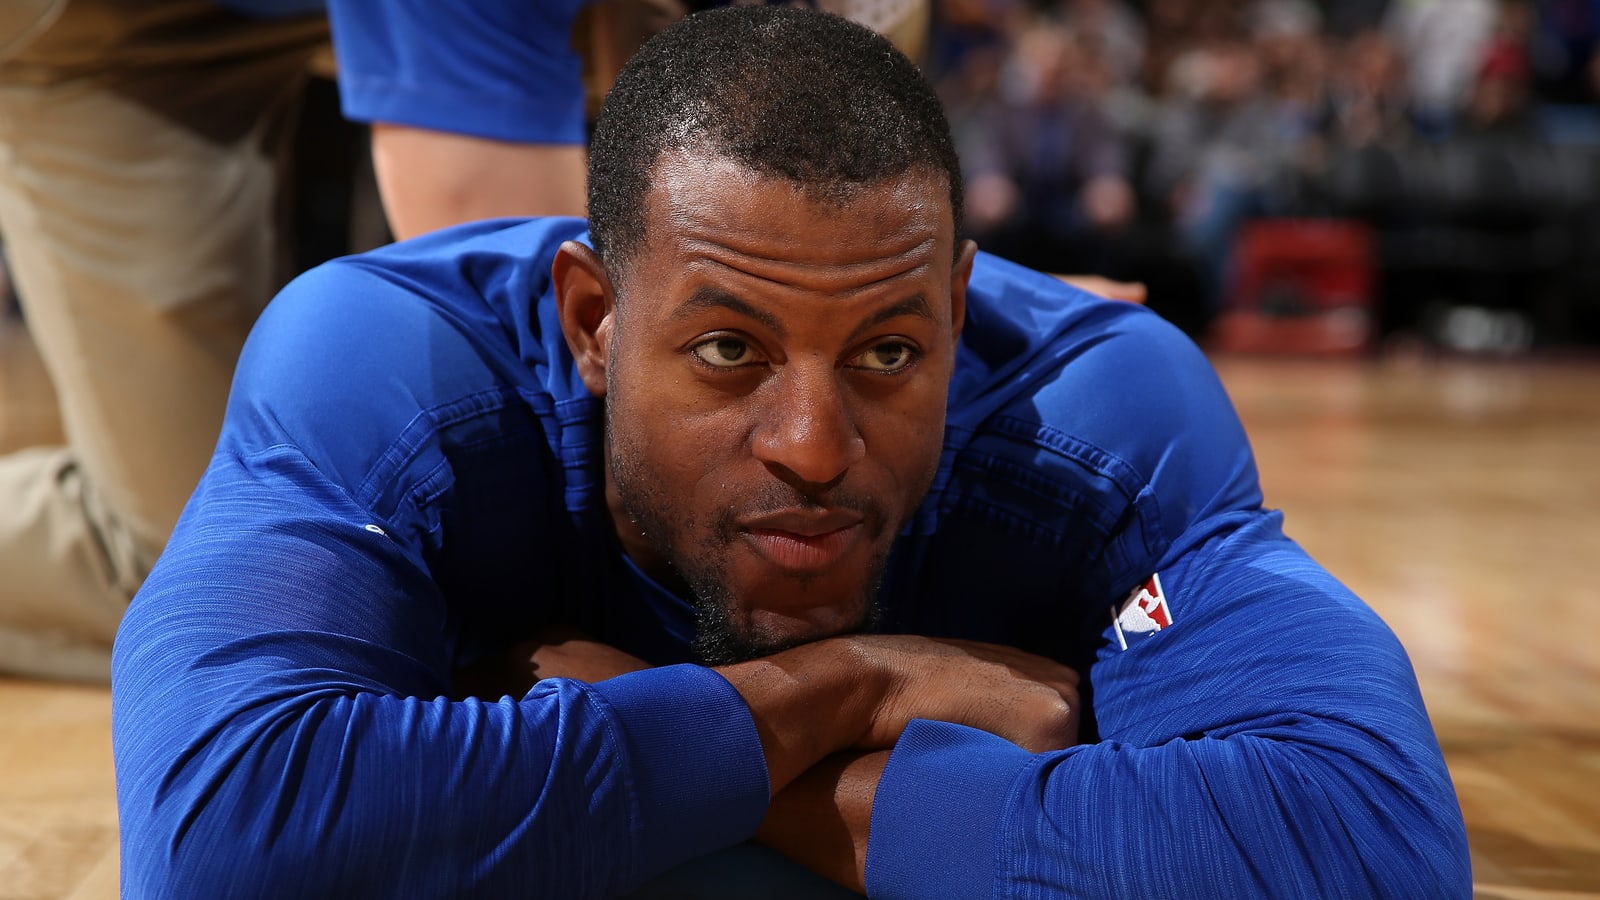 Mother of Iguodala's daughter makes troubling accusation